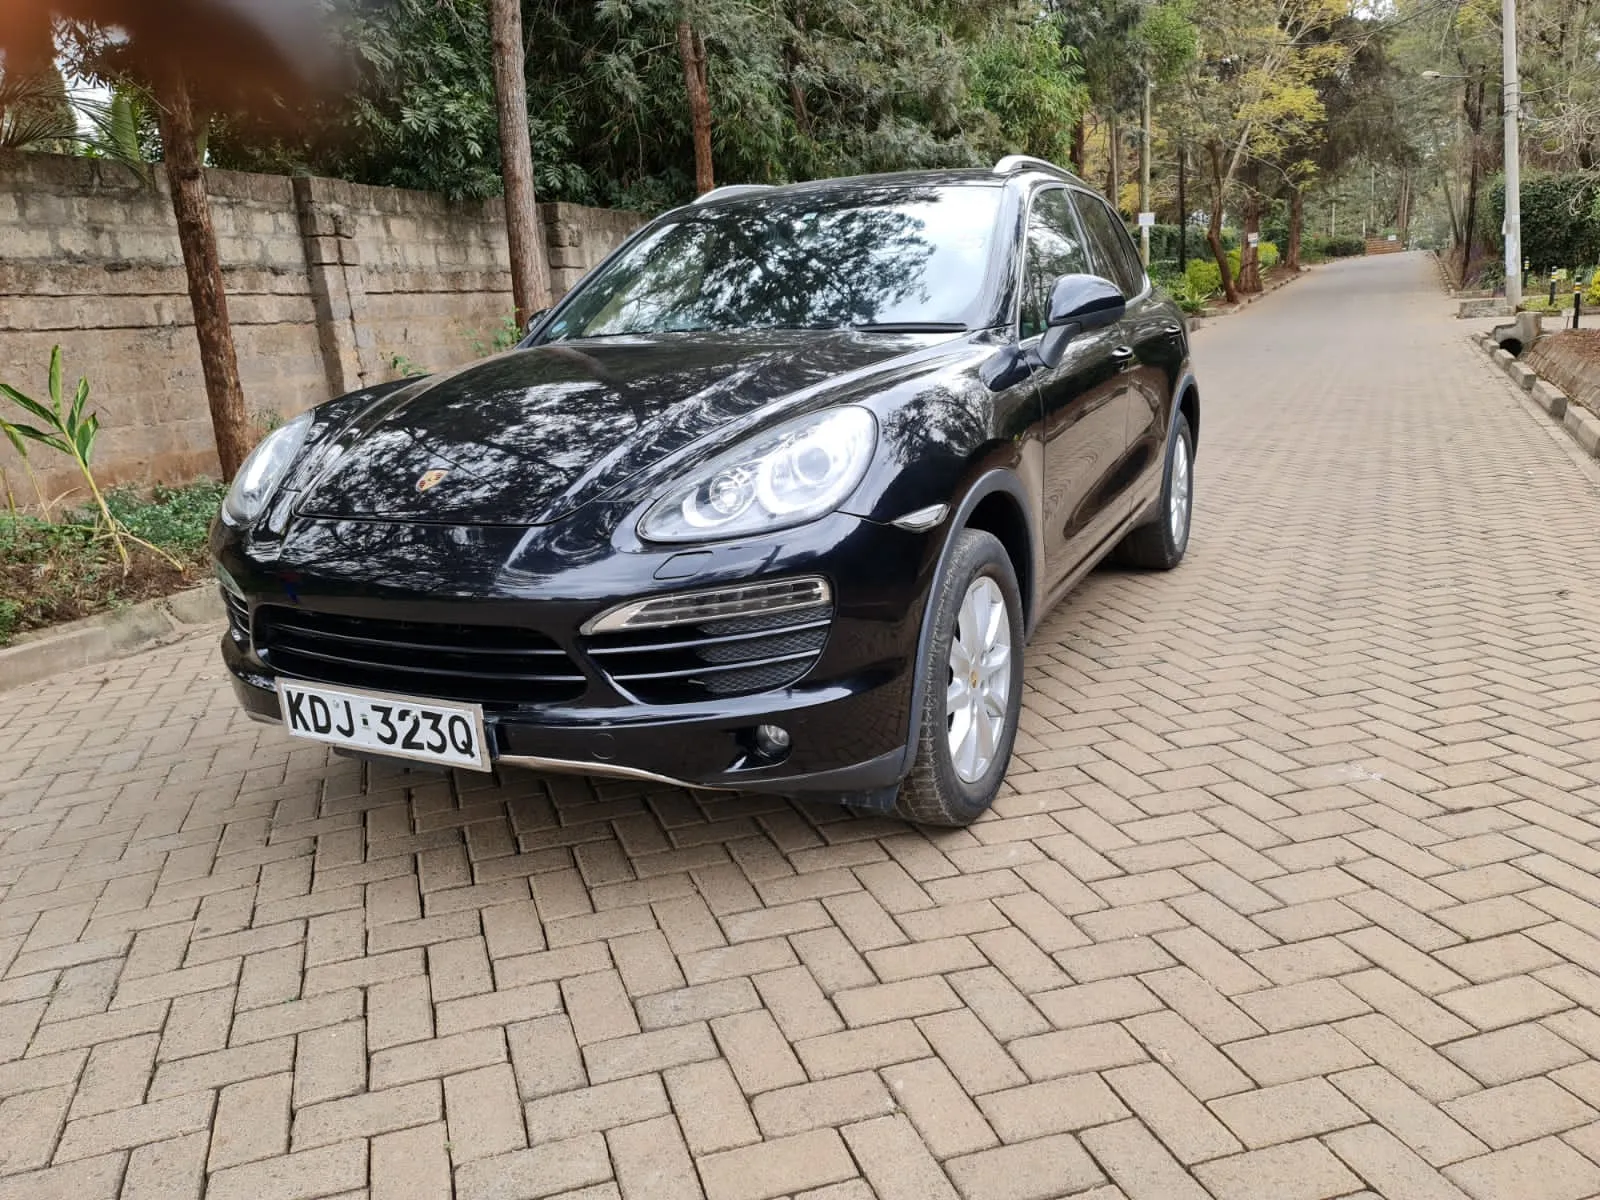 Cars Cars For Sale/Vehicles-Porsche Cayenne PETROL KDJ 4.6M ONLY Trade in OK Wow 9